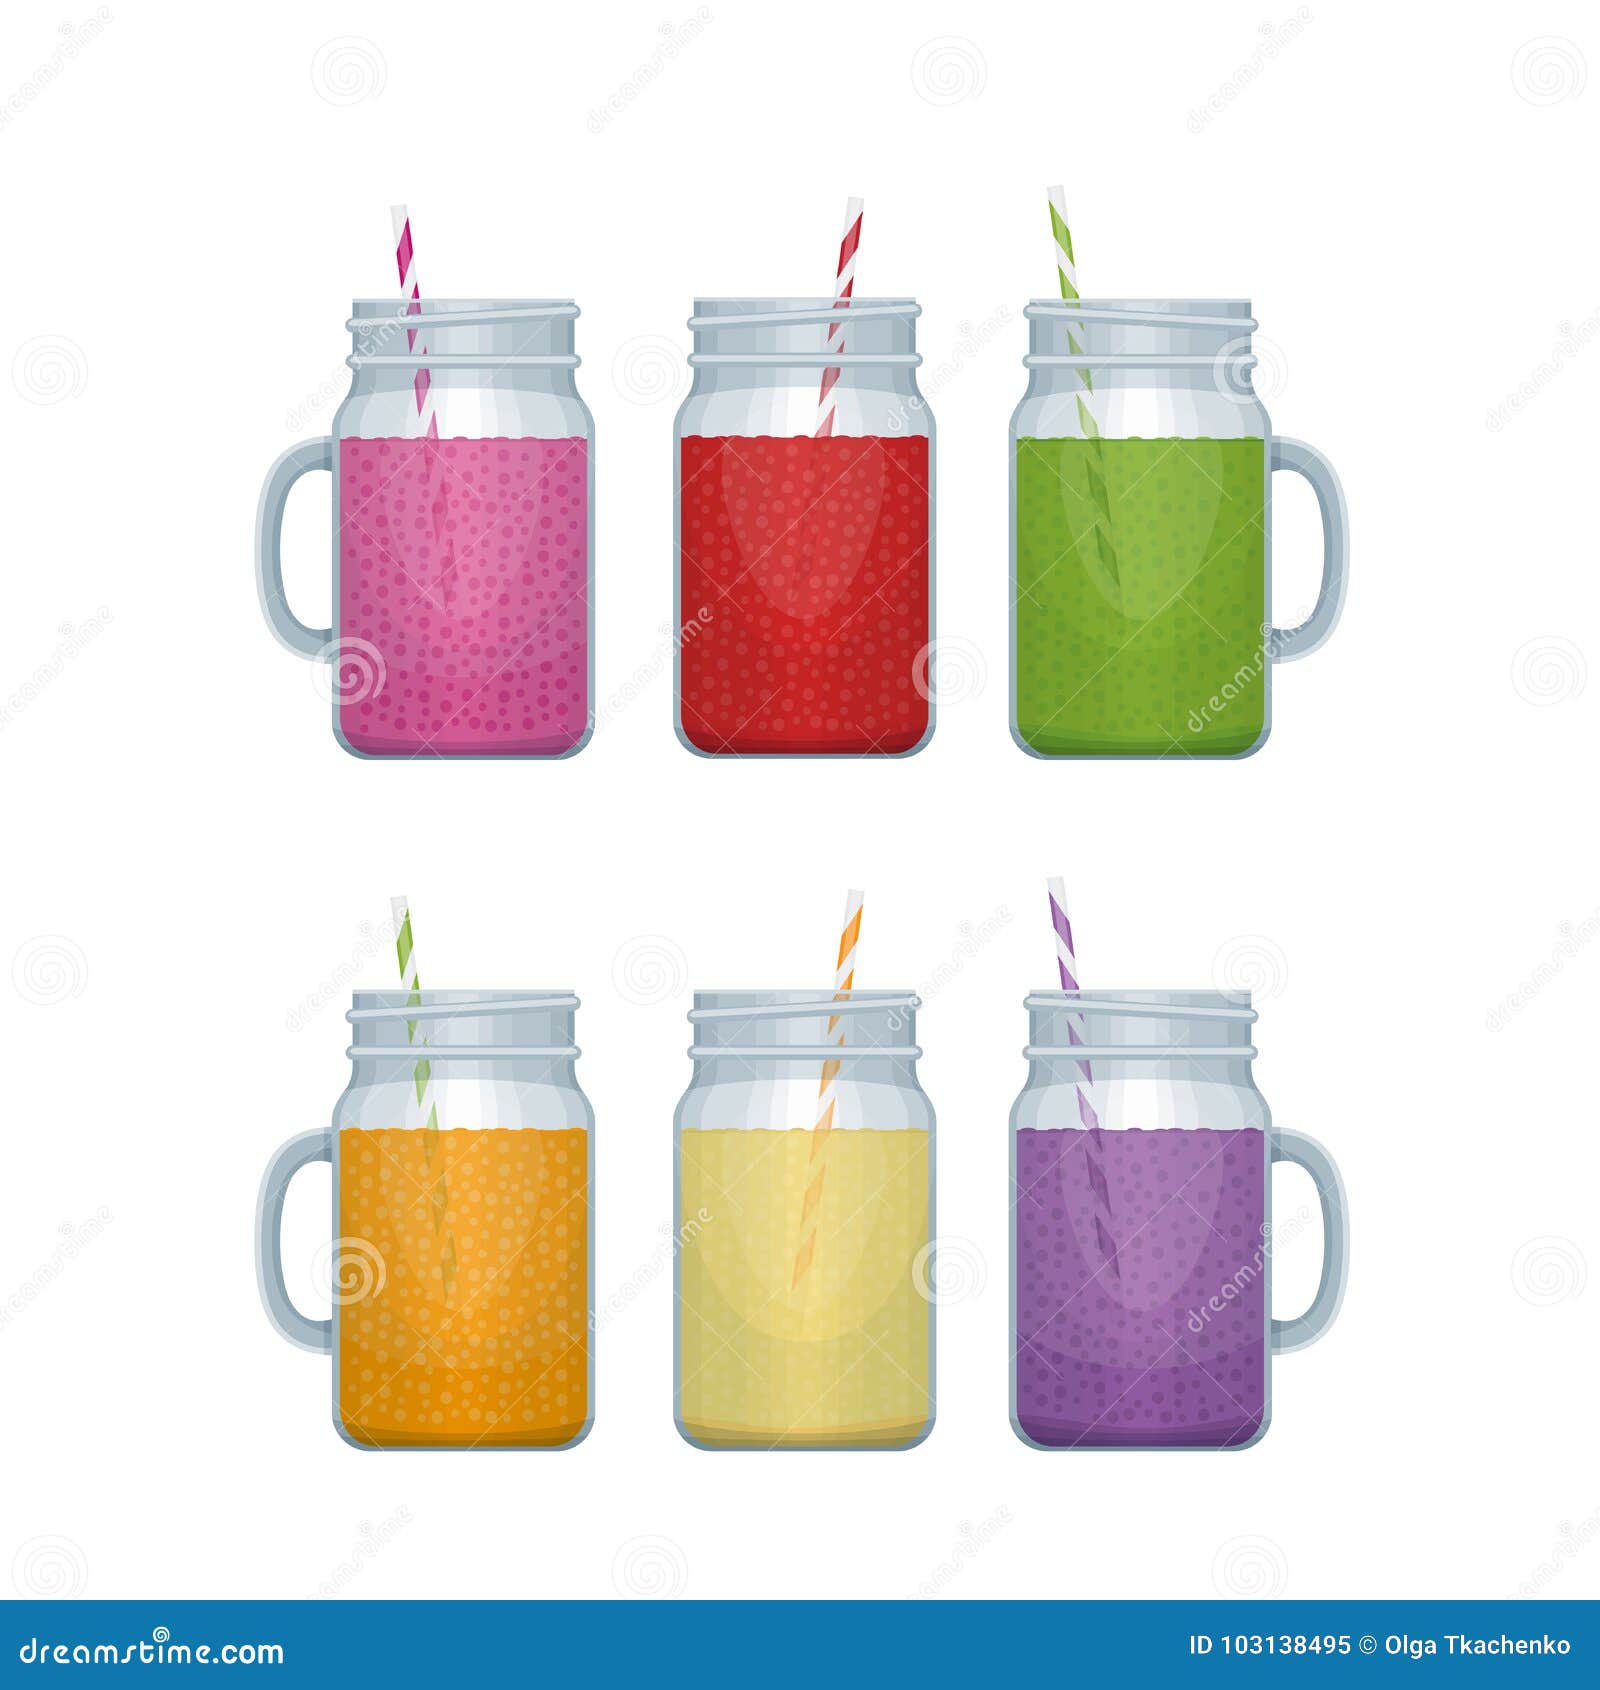 Realistic smoothie in mason jar glass set Vector Image